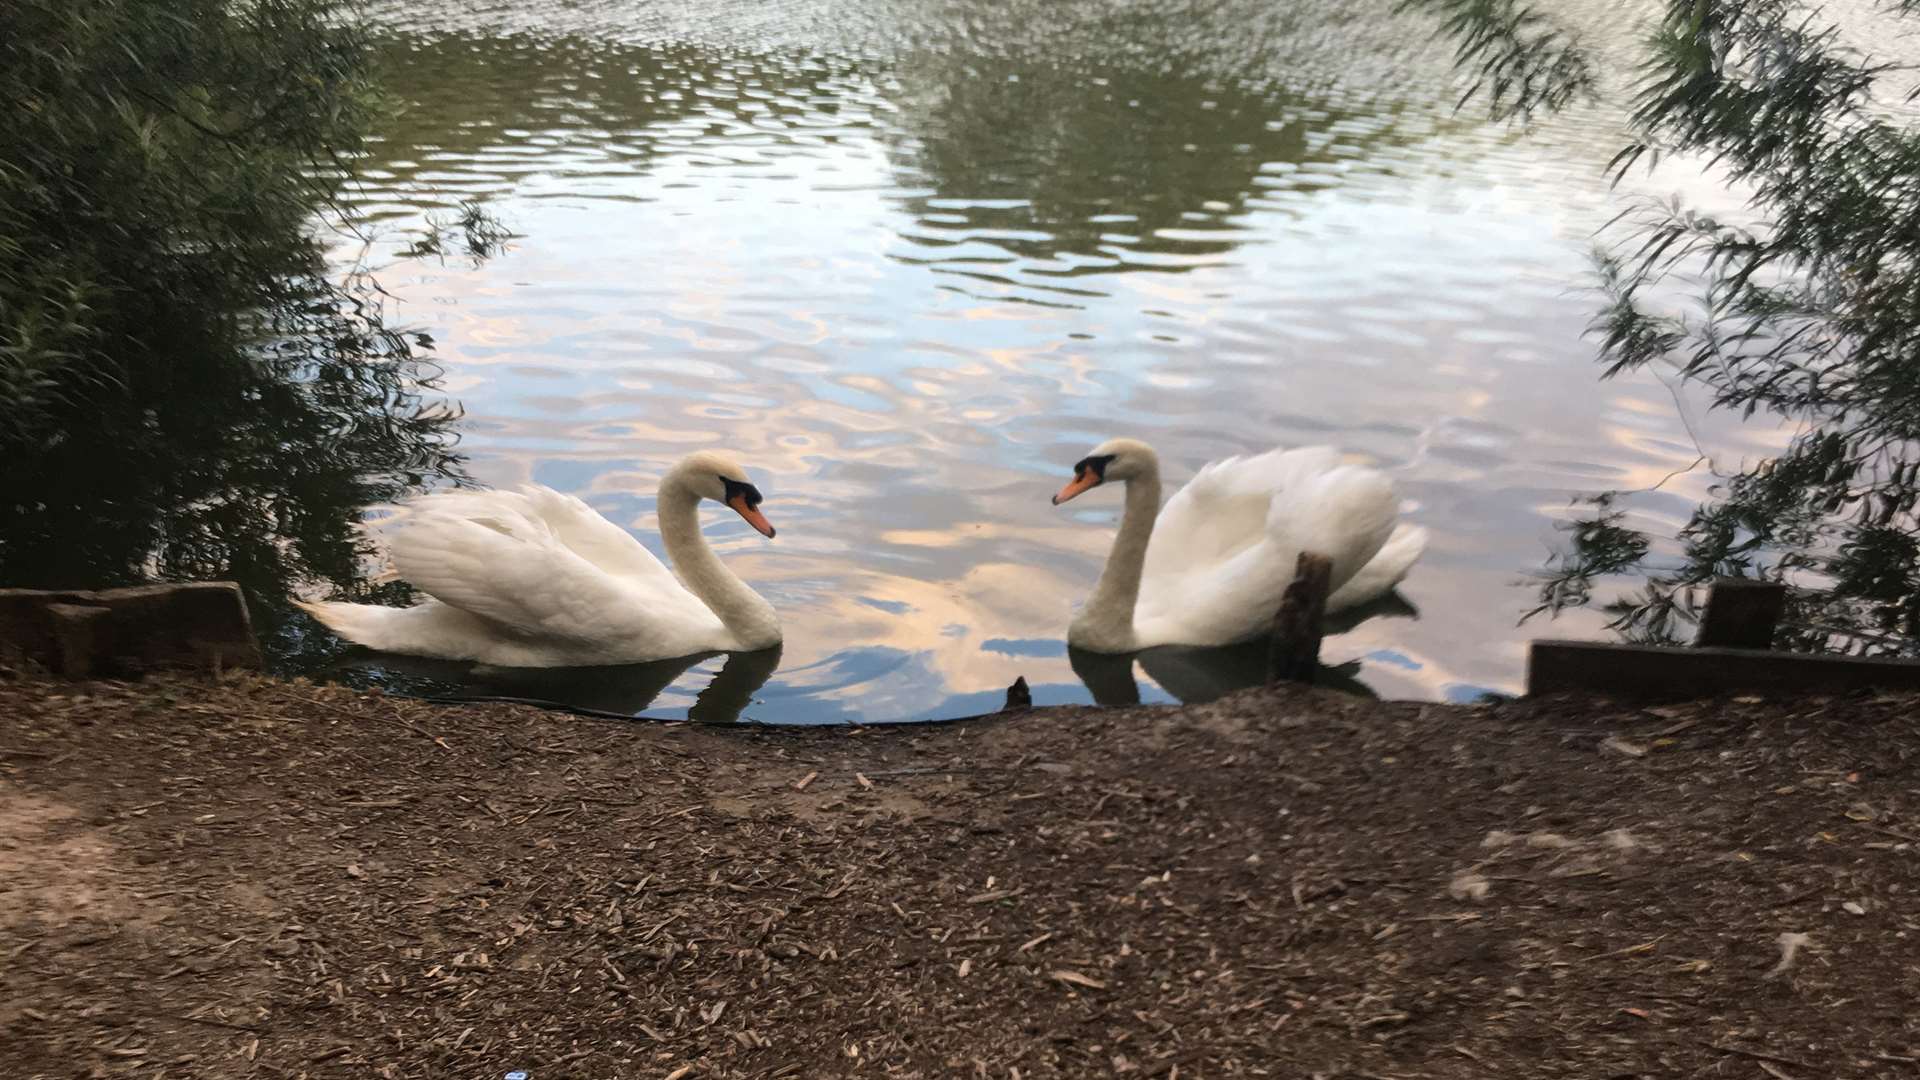 The swans reunited